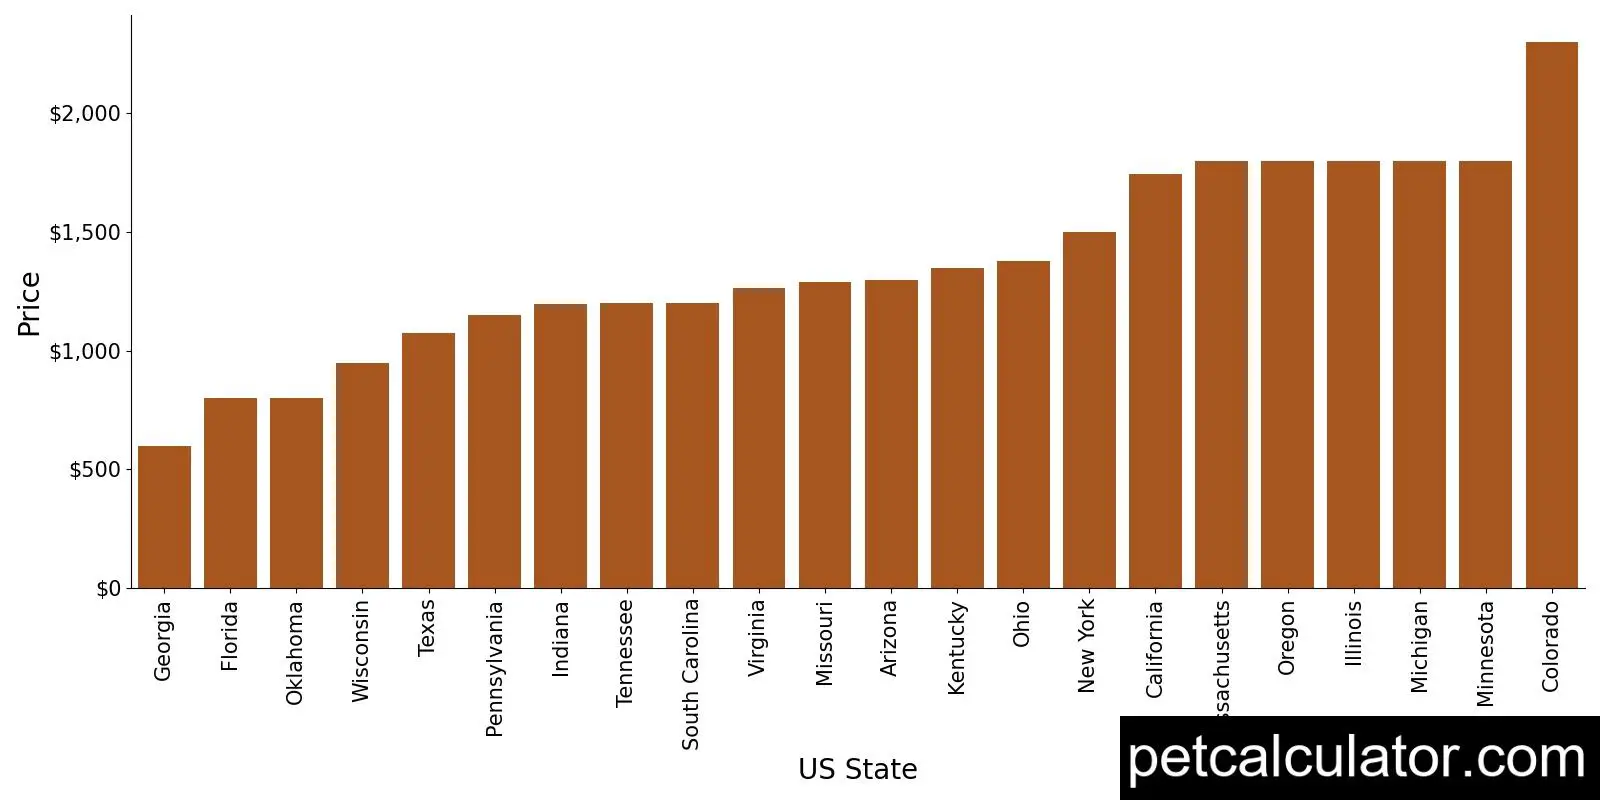 Price of Border Terrier by US State 